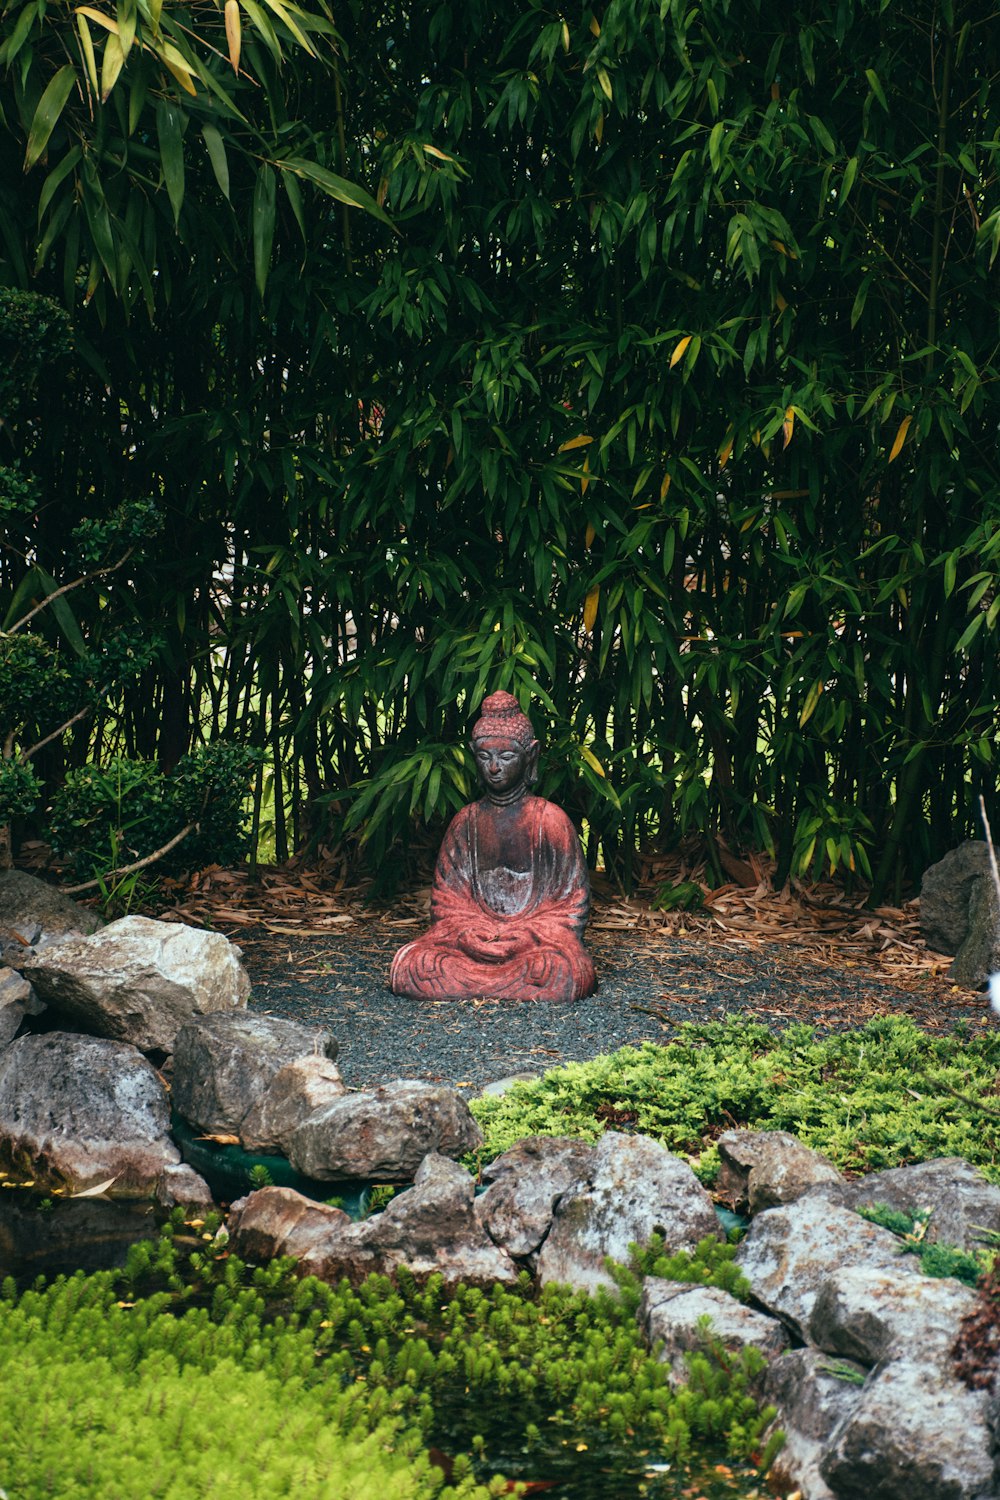 a statue of a person sitting in a garden